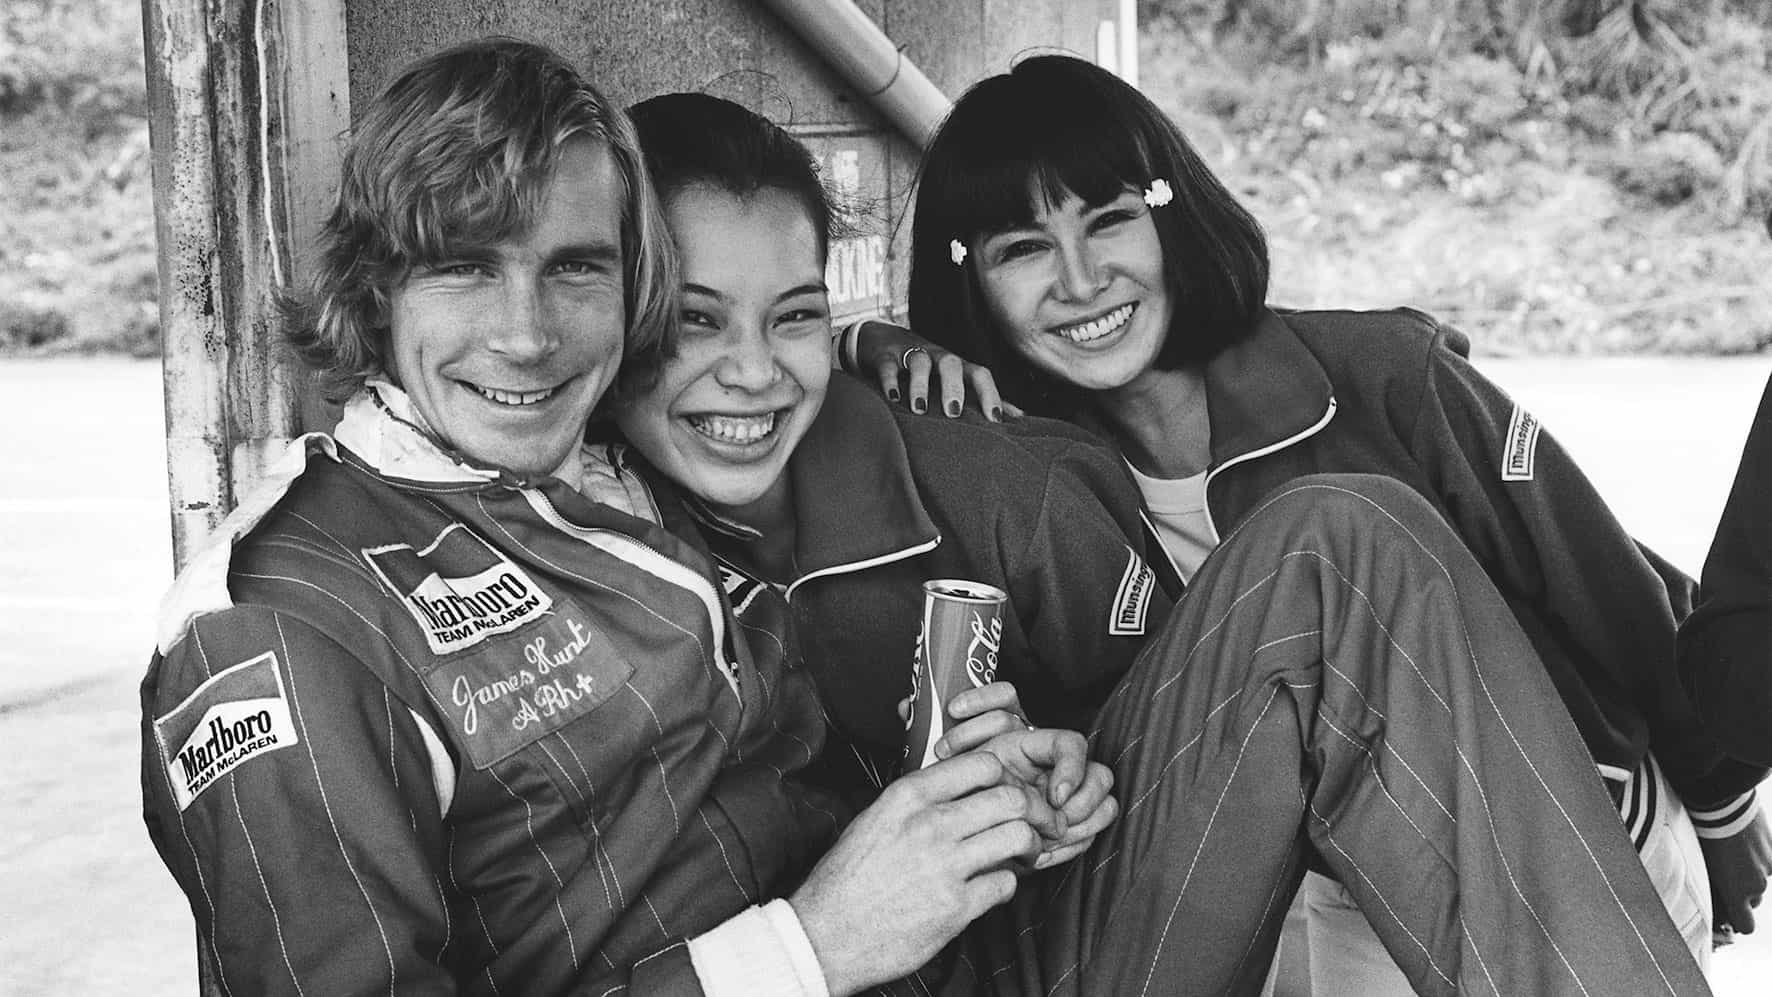 James Hunt celebrates with two women